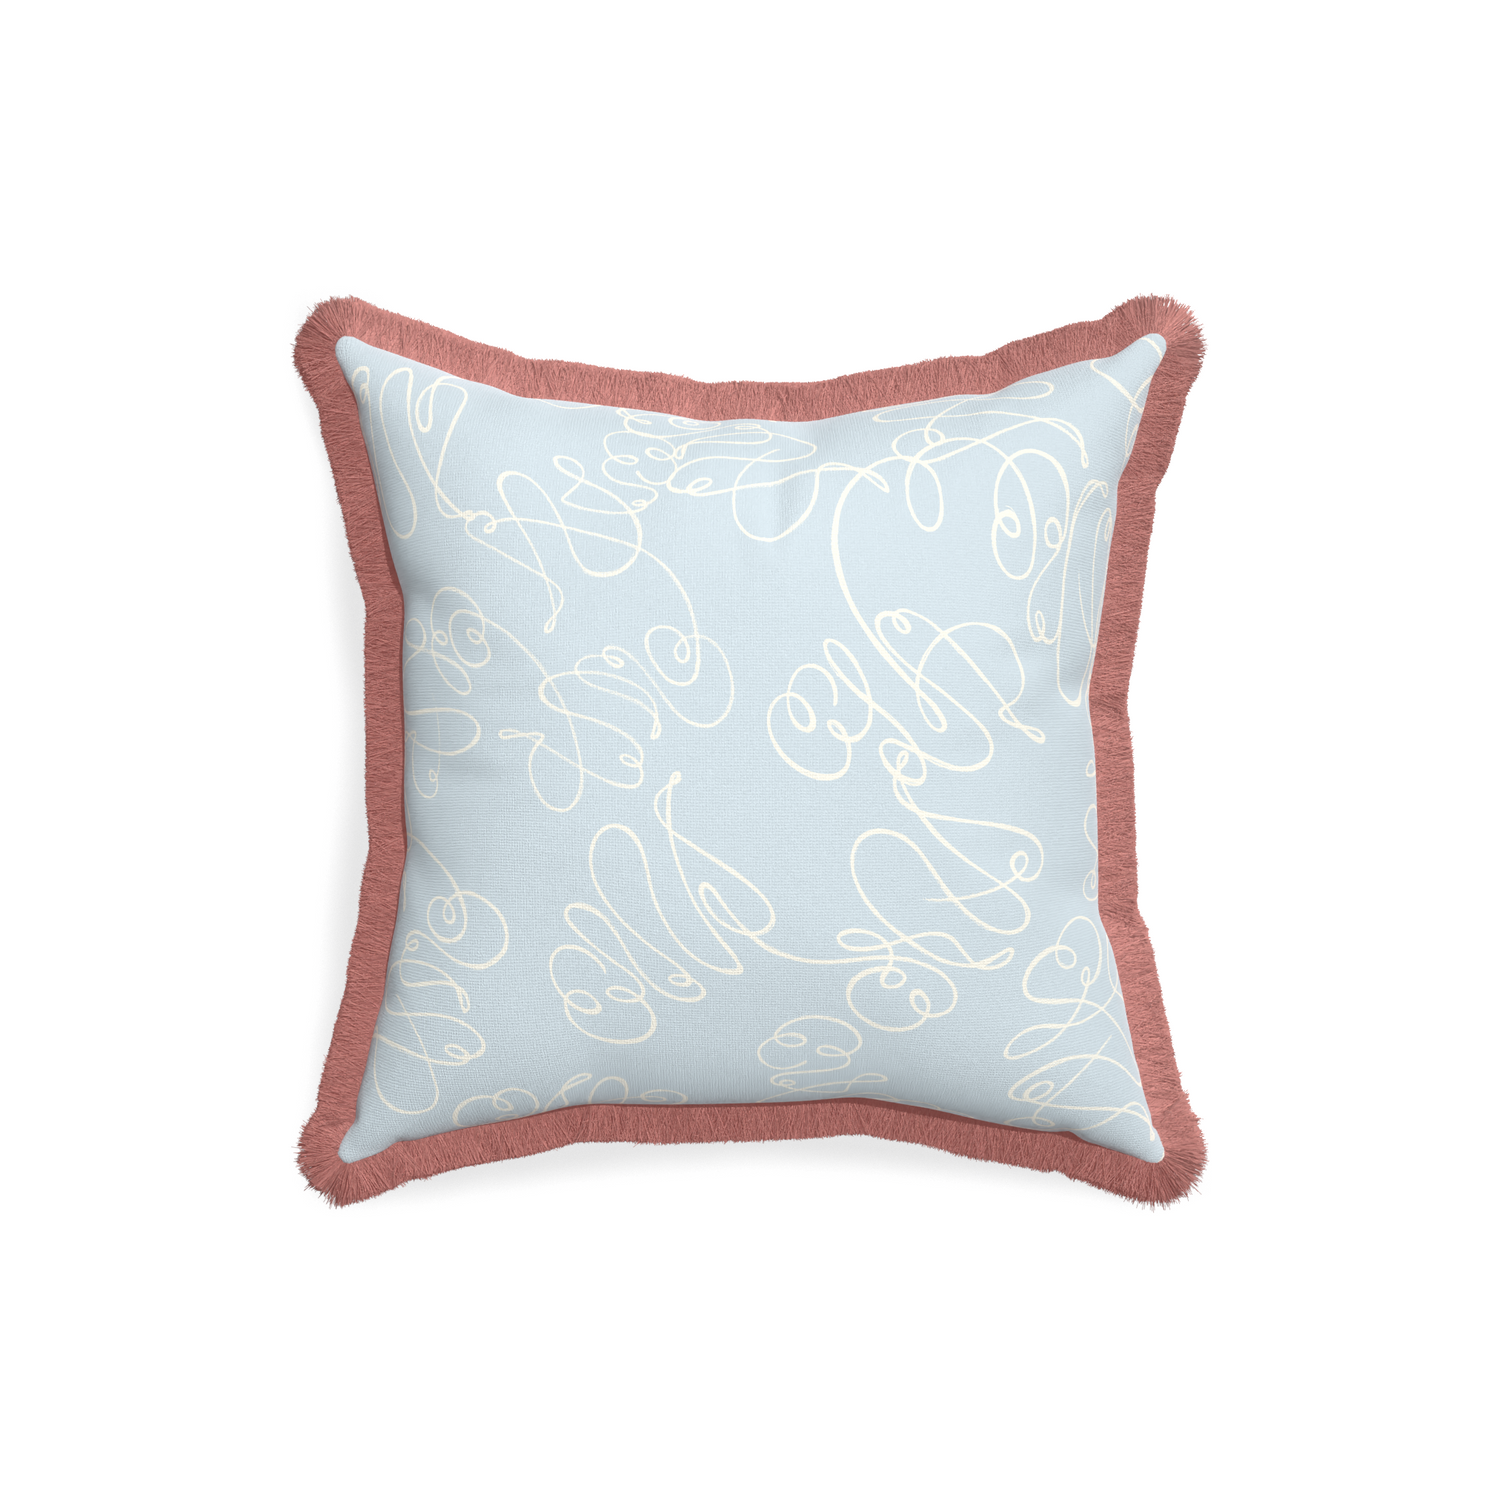 18-square mirabella custom pillow with d fringe on white background